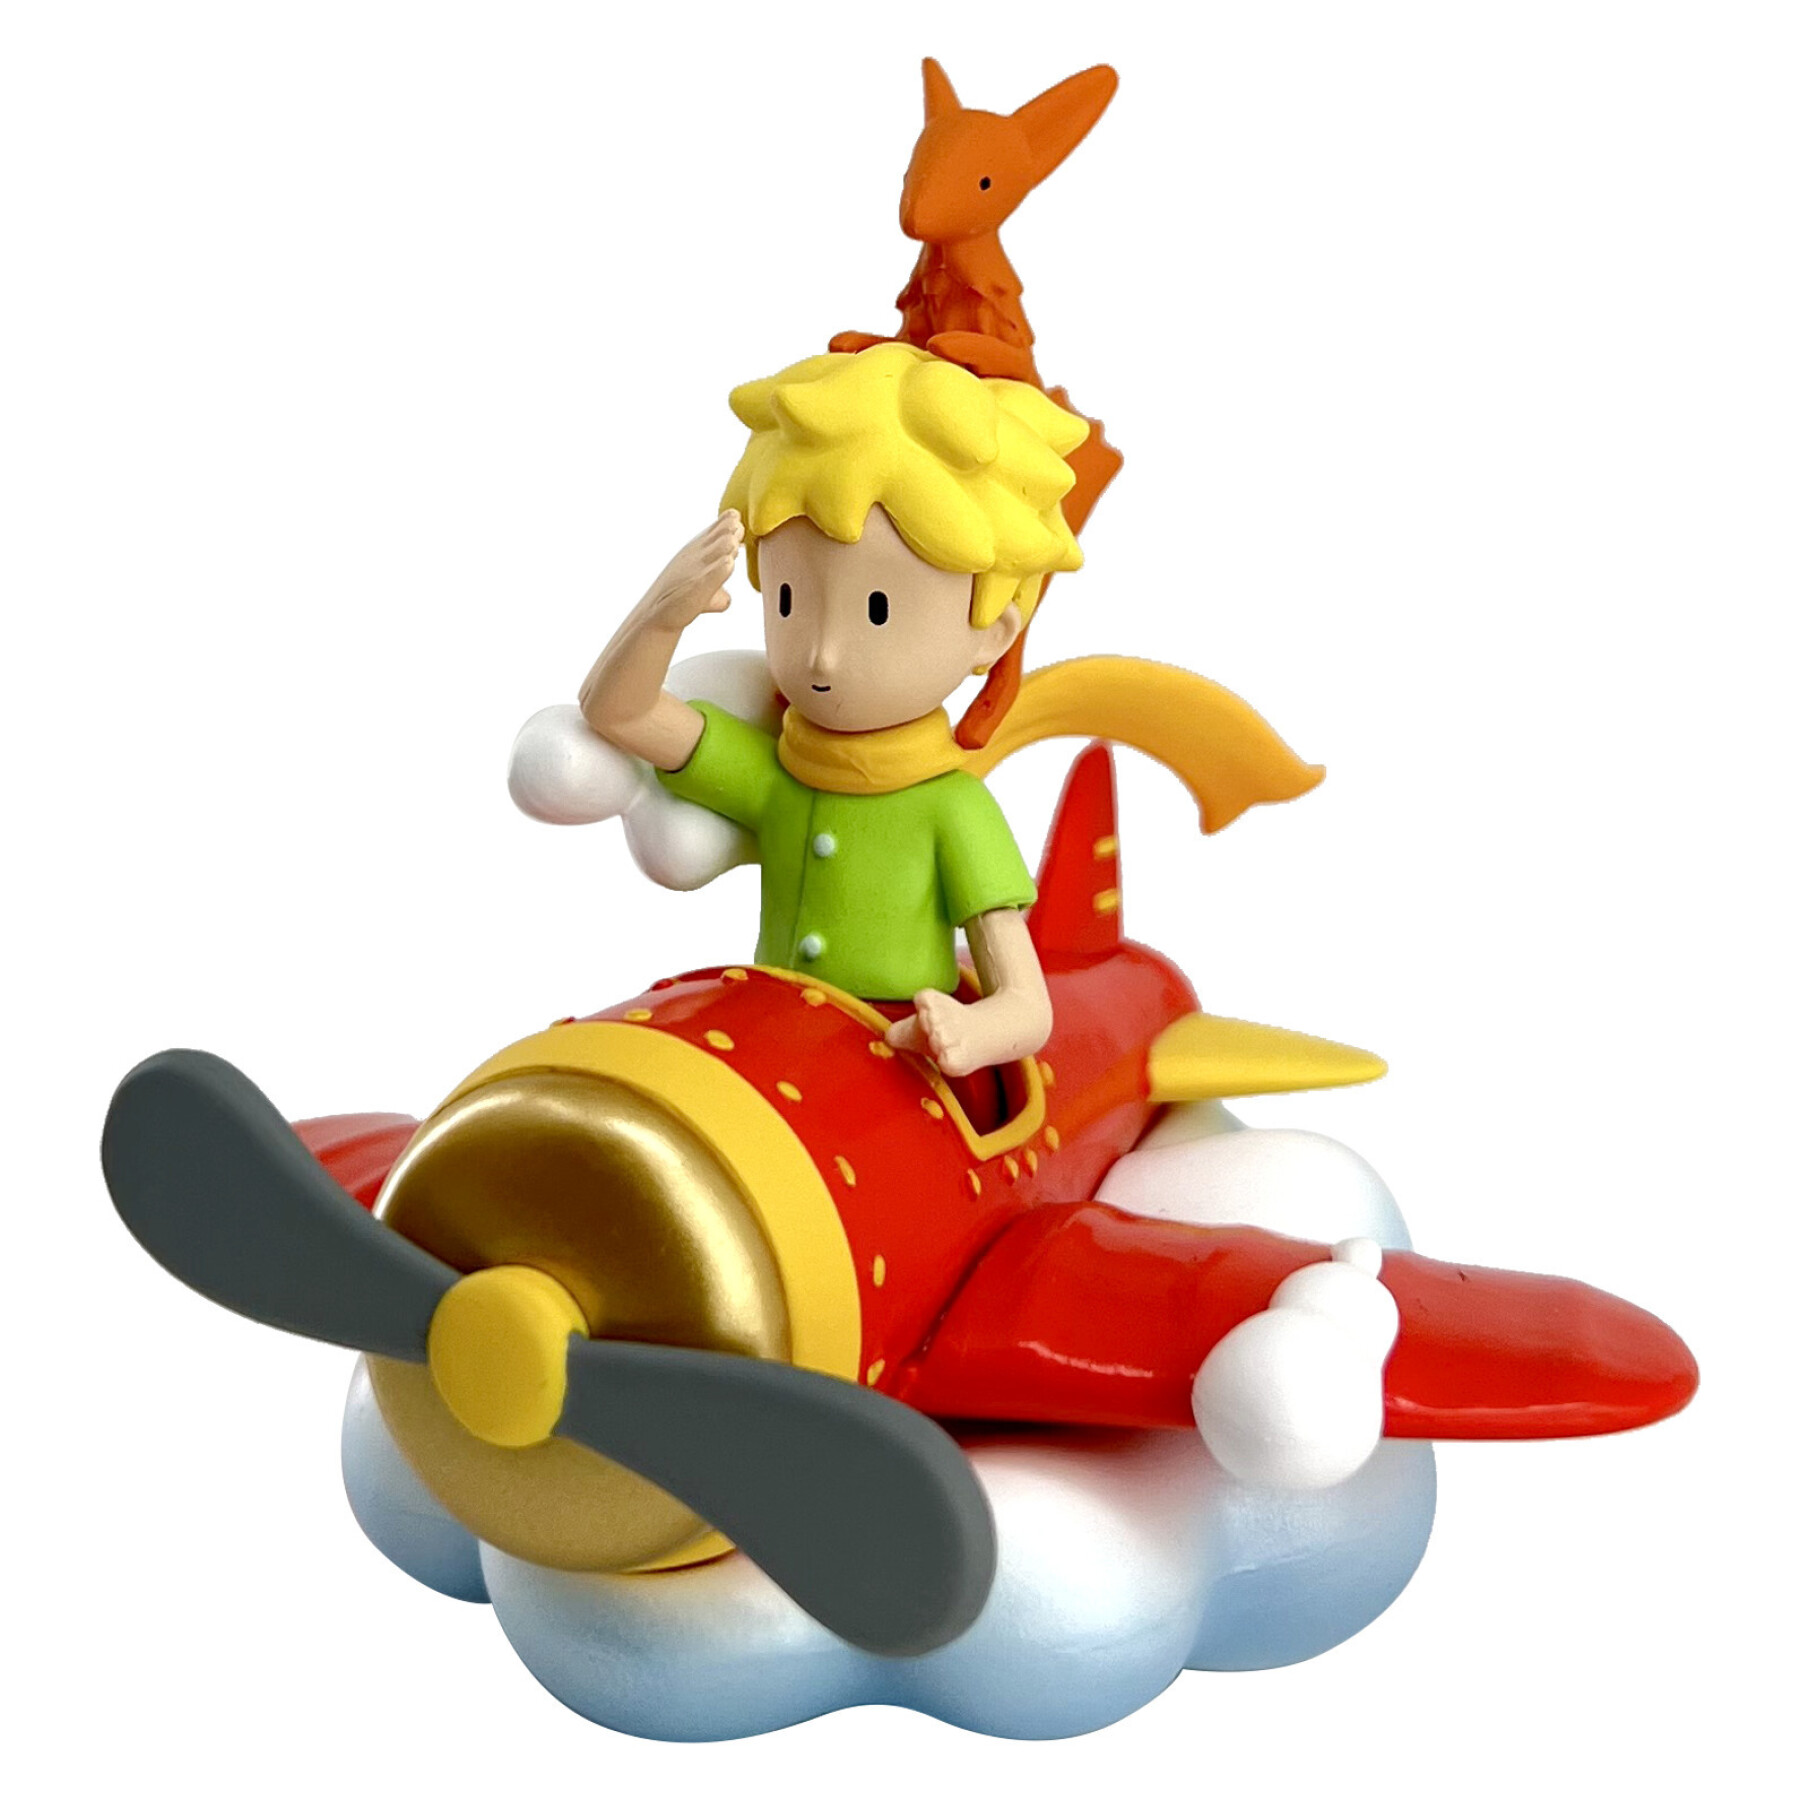 The Little Prince and the fox in a plane figurine Plastoy